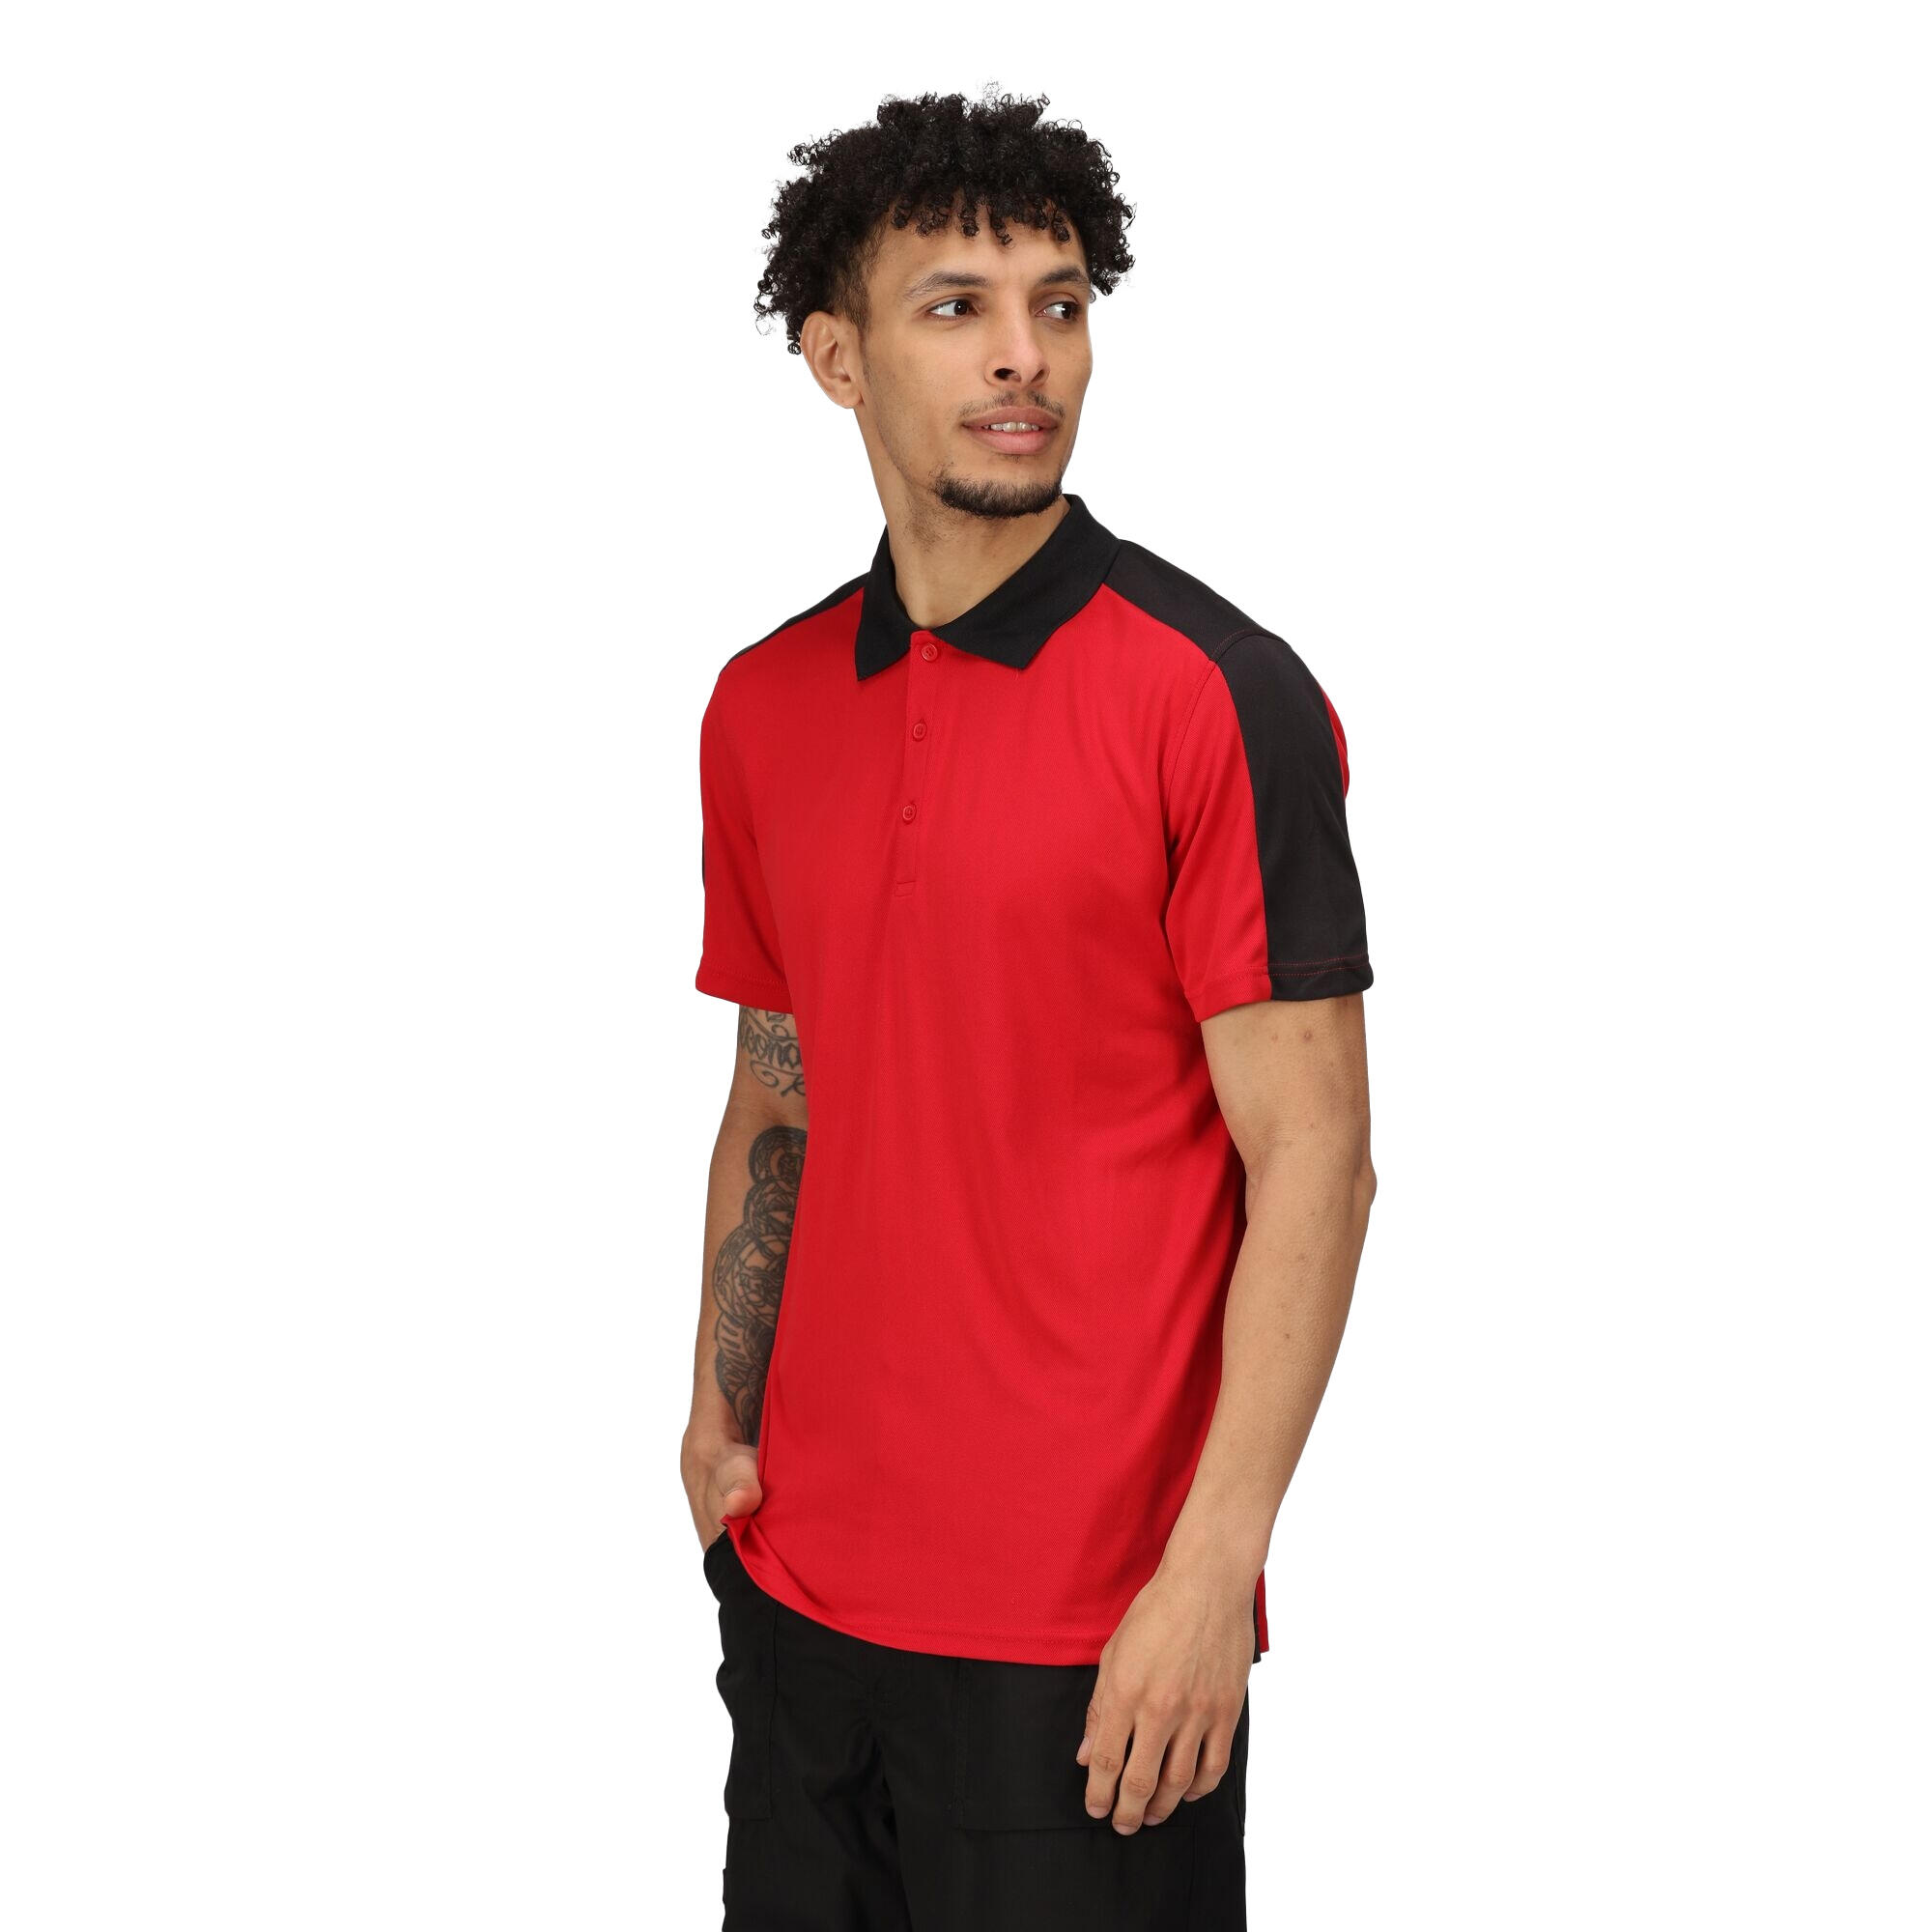 Contrast Coolweave Pique Polo Shirt (Classic Red/Black) 3/4